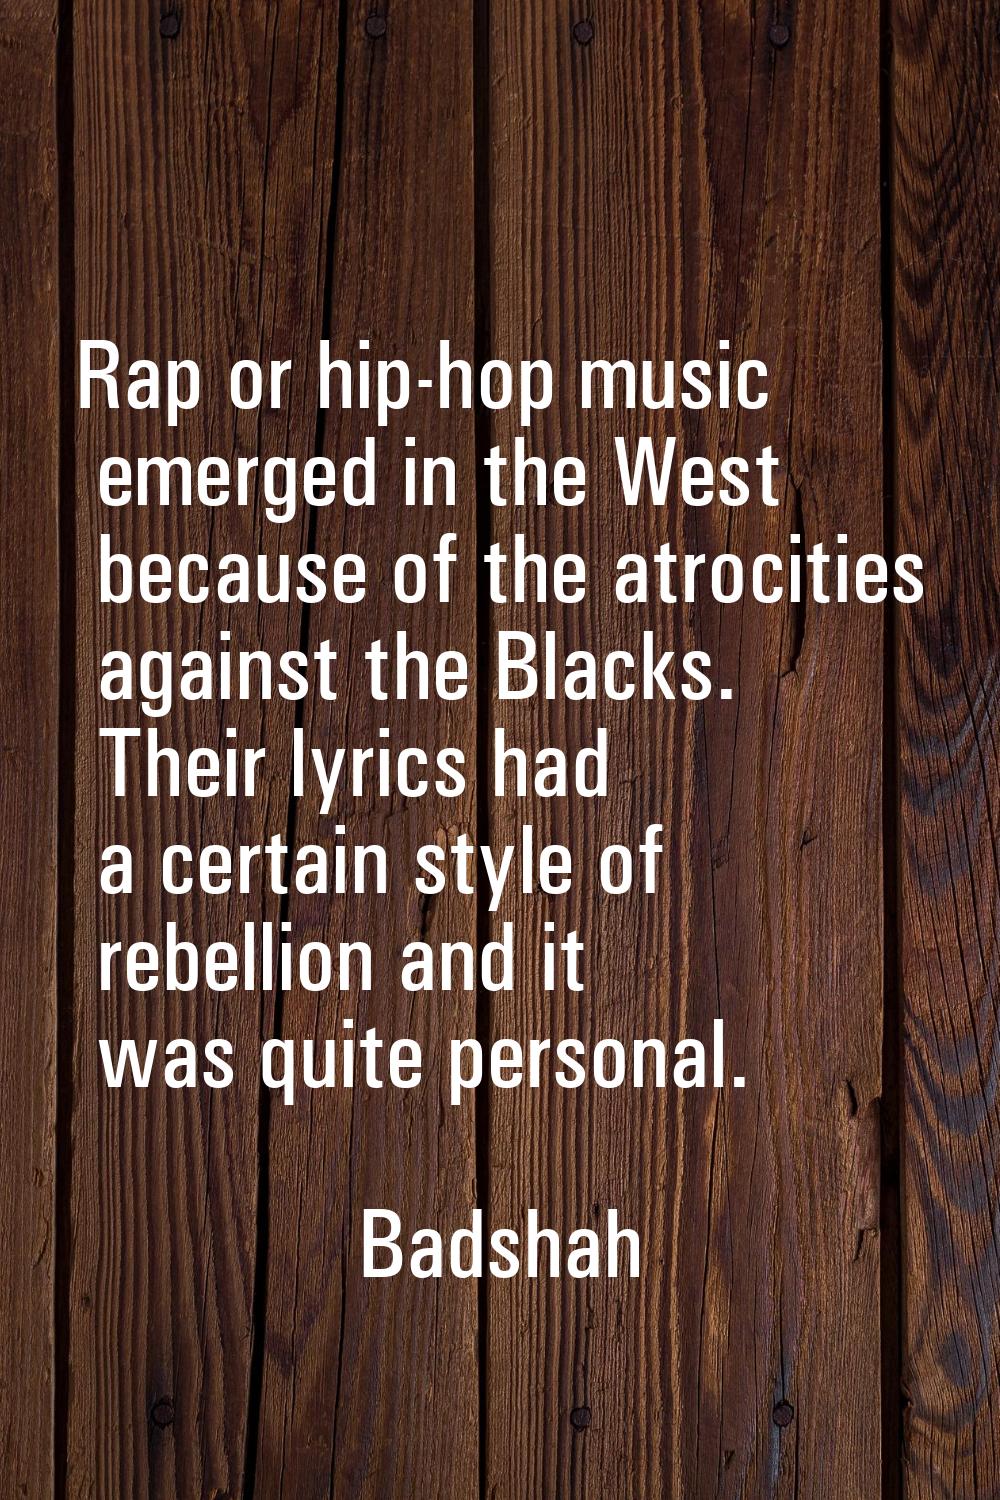 Rap or hip-hop music emerged in the West because of the atrocities against the Blacks. Their lyrics